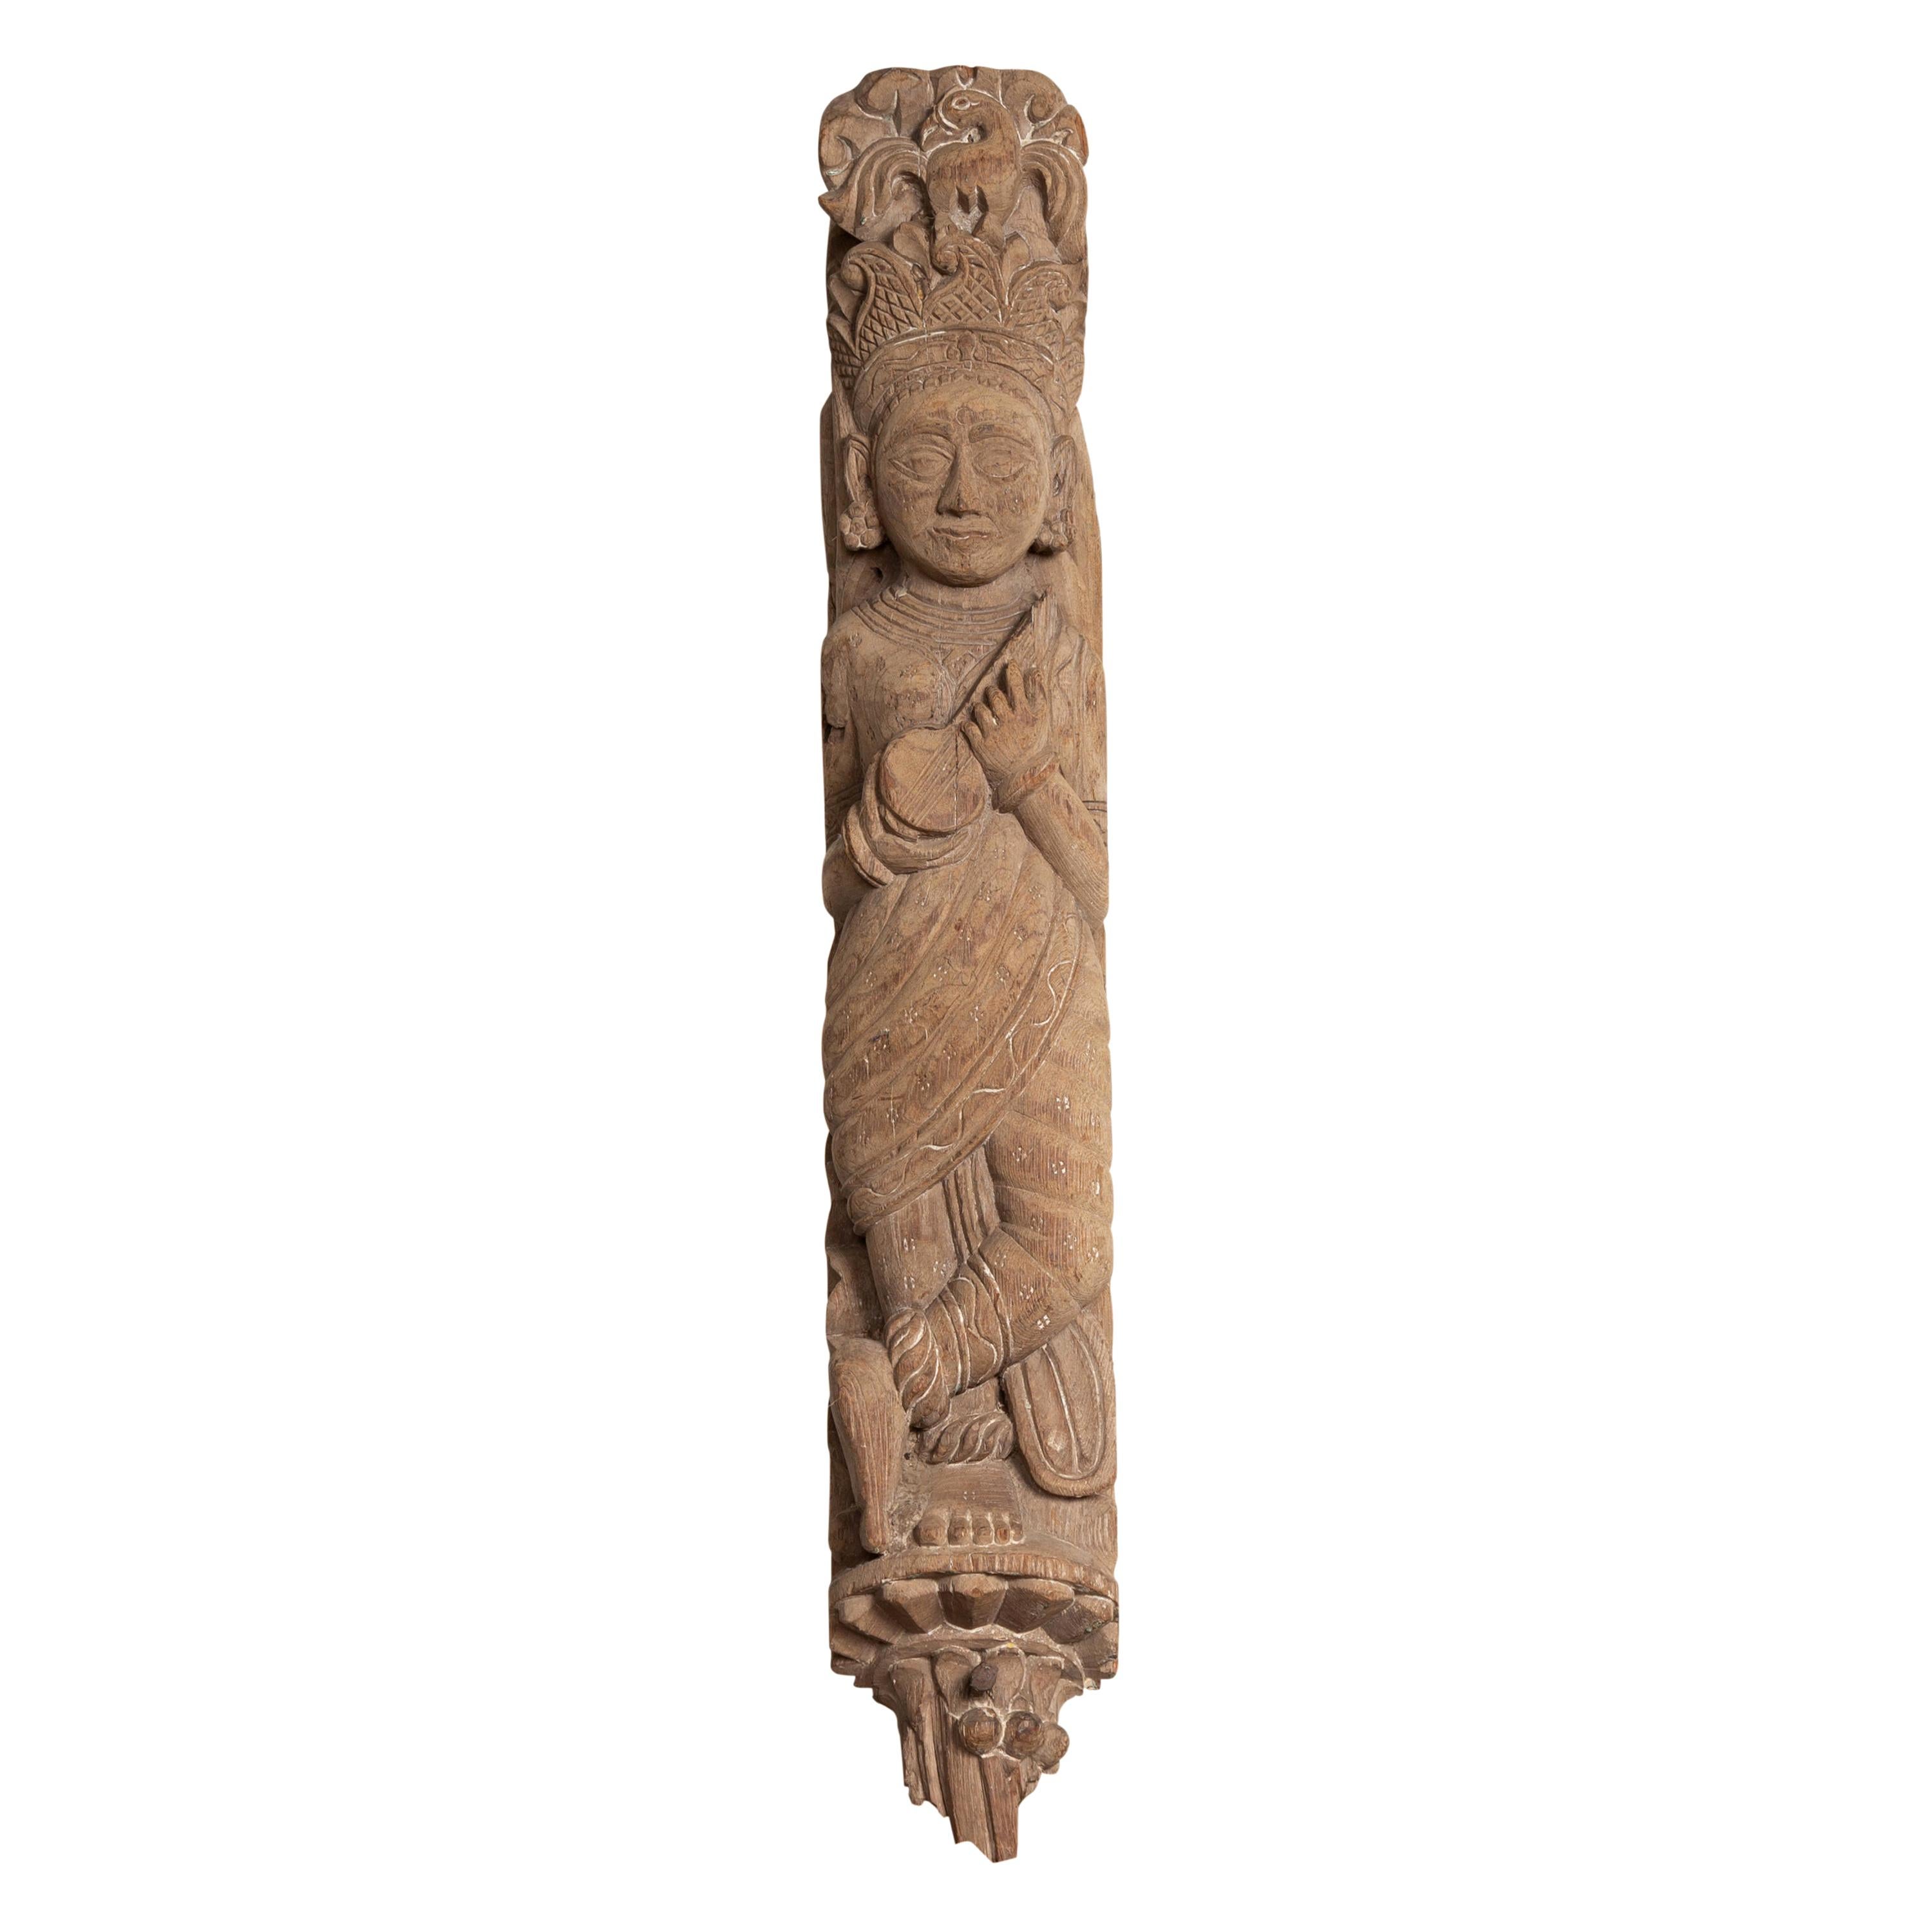 Carved Indian Temple Carving Statue from Gujarat Depicting a Celestial Musician